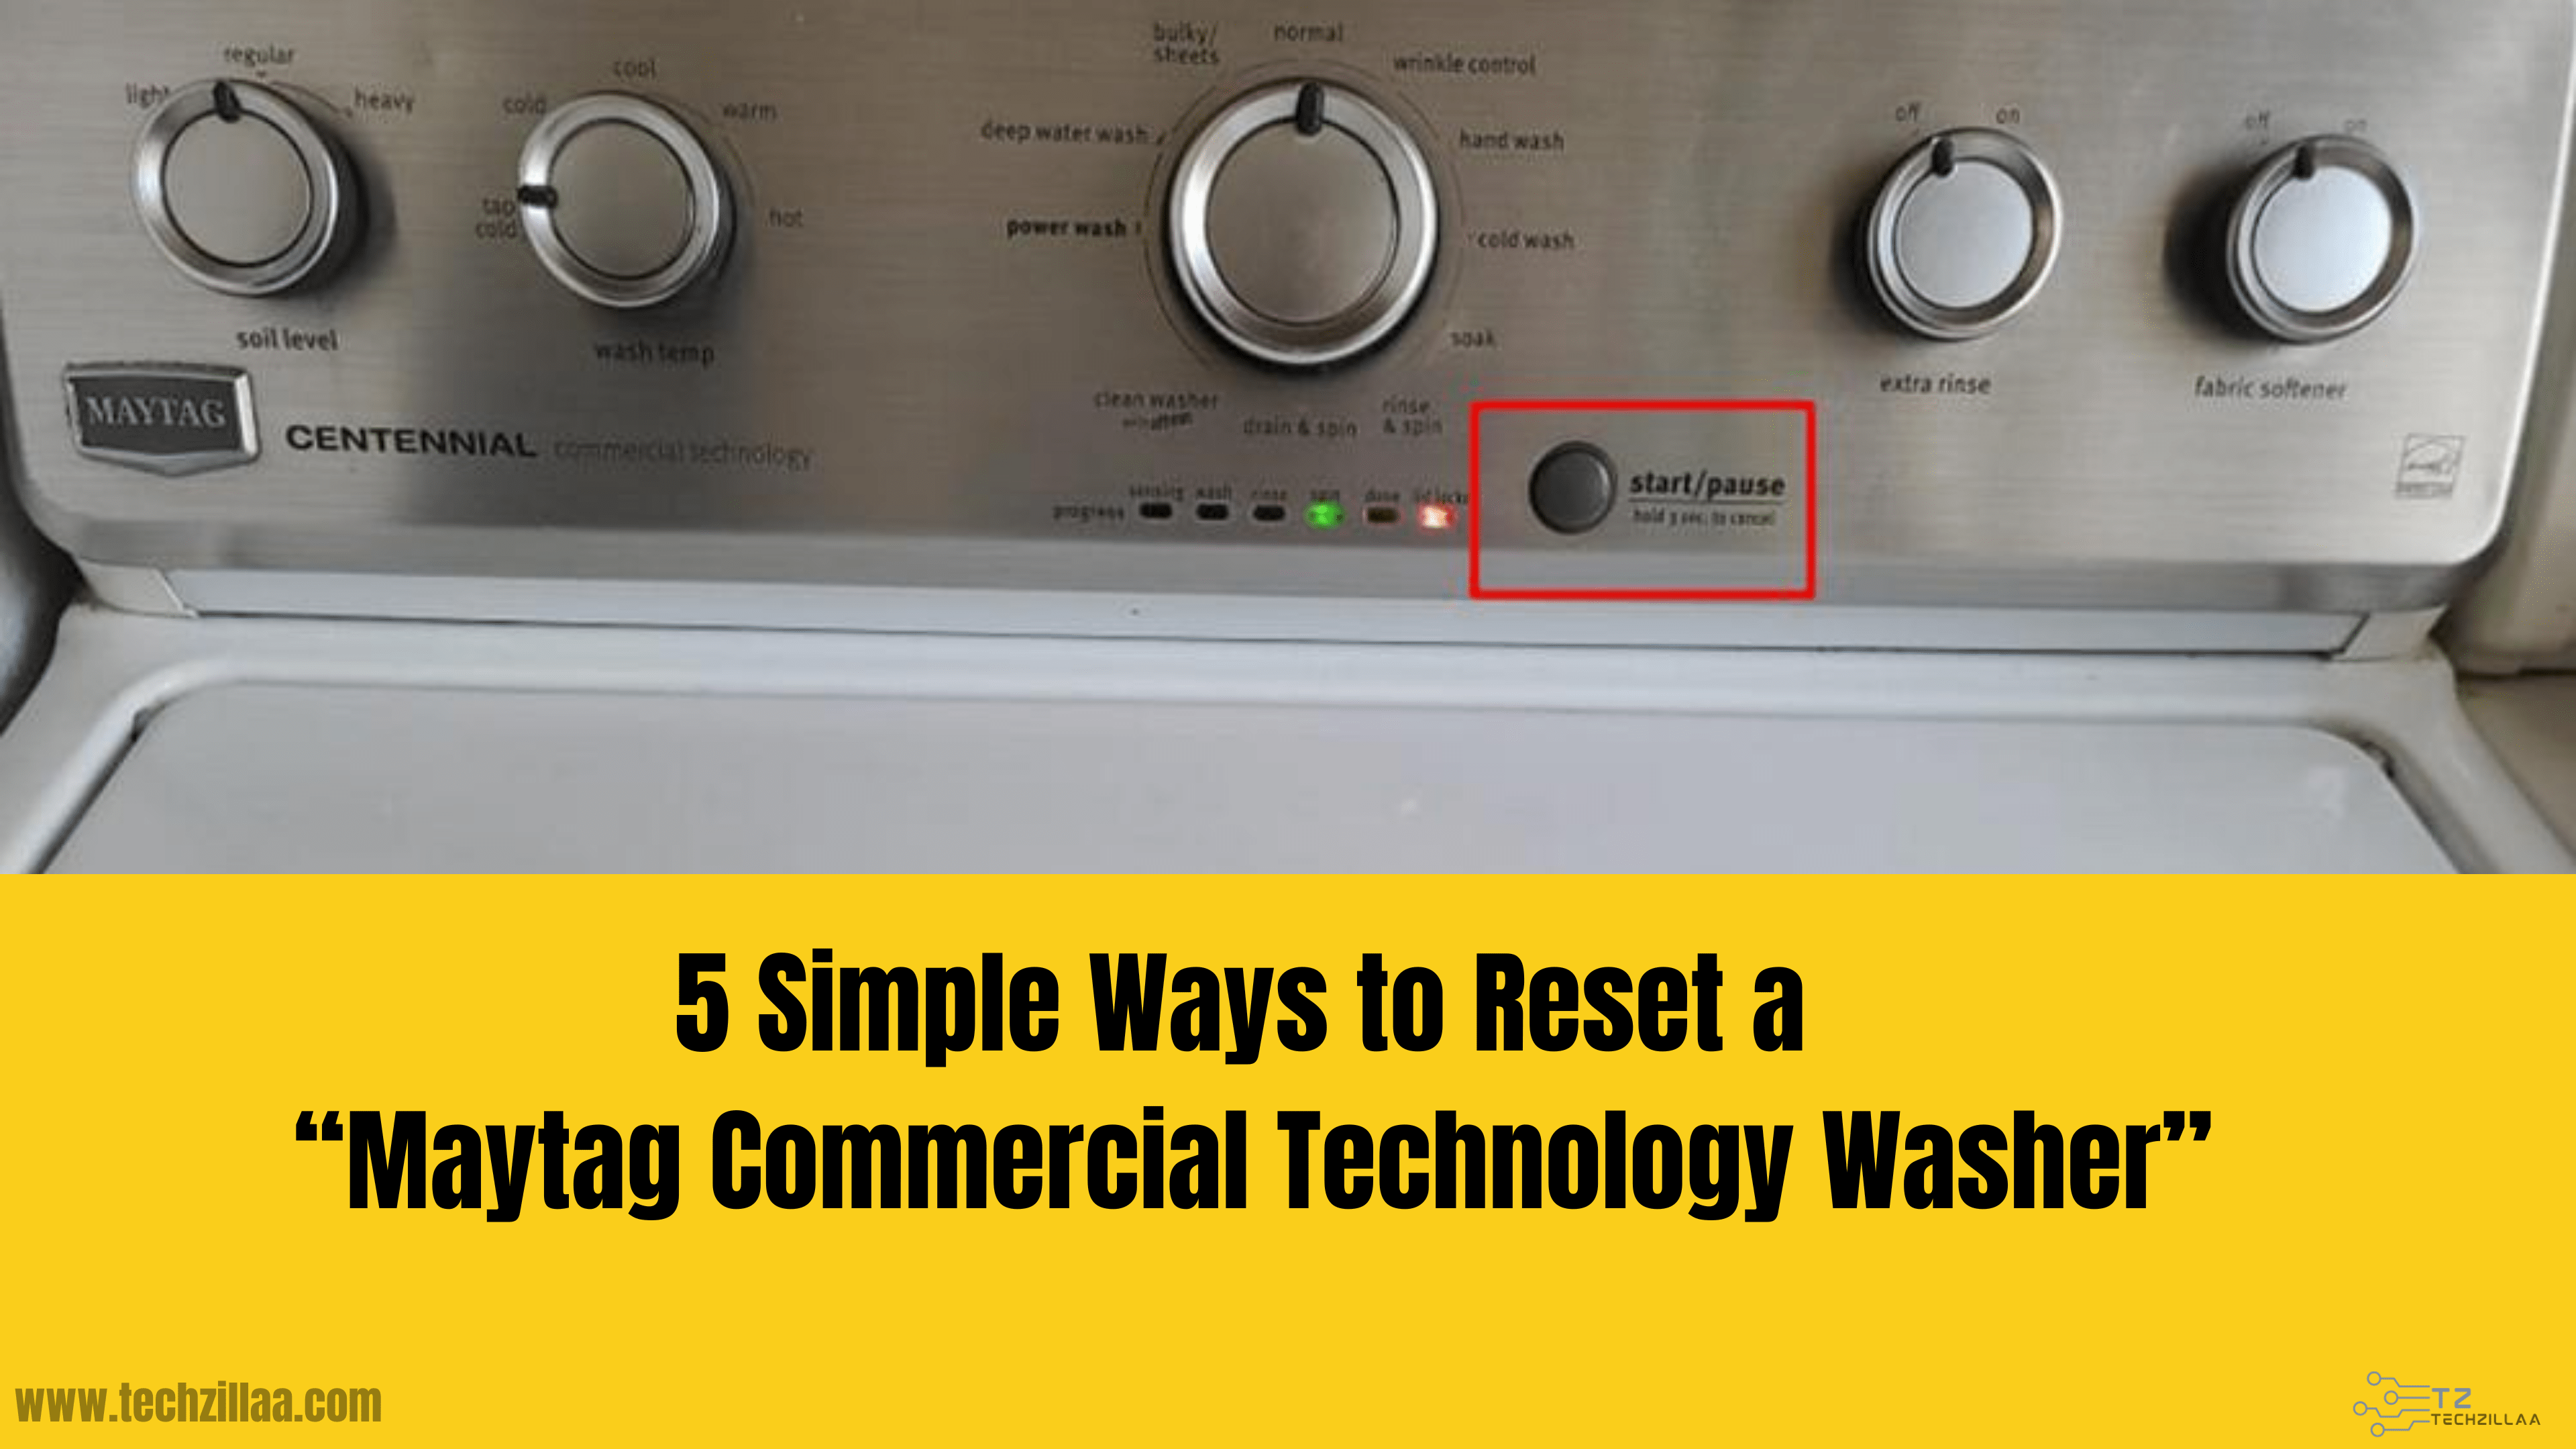 5 Convenient Ways to Reset a Maytag Commercial Technology washer